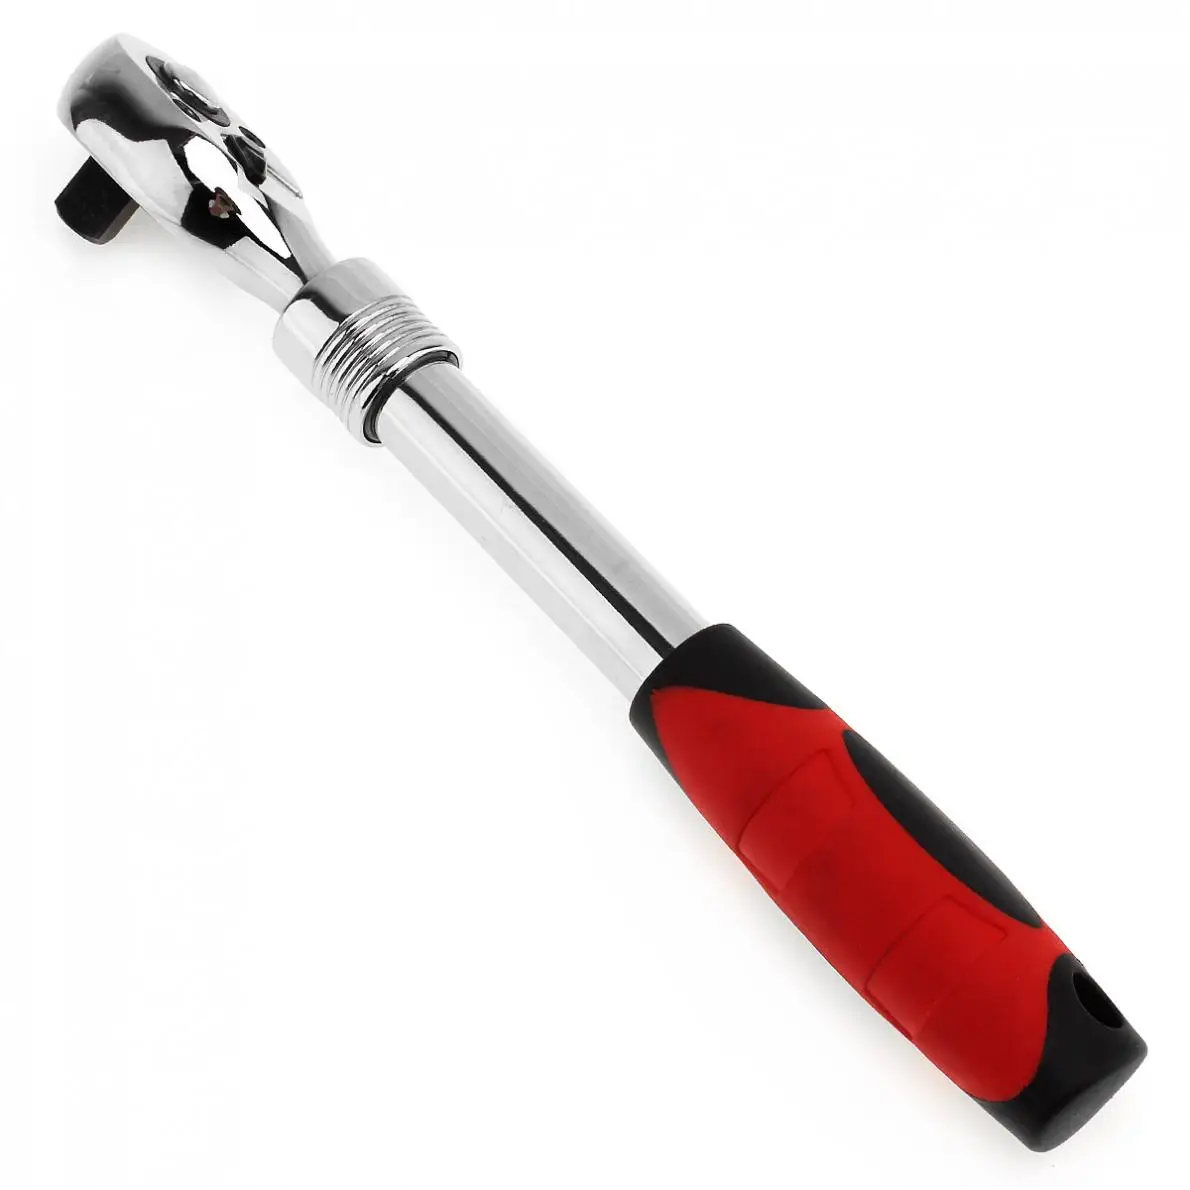 

New Flexible Ratchet Wrench 1/2" Allen Key Length Telescopic Socket Wrench 72 Teeth Ratchet Spanner Wrench Hand Tools